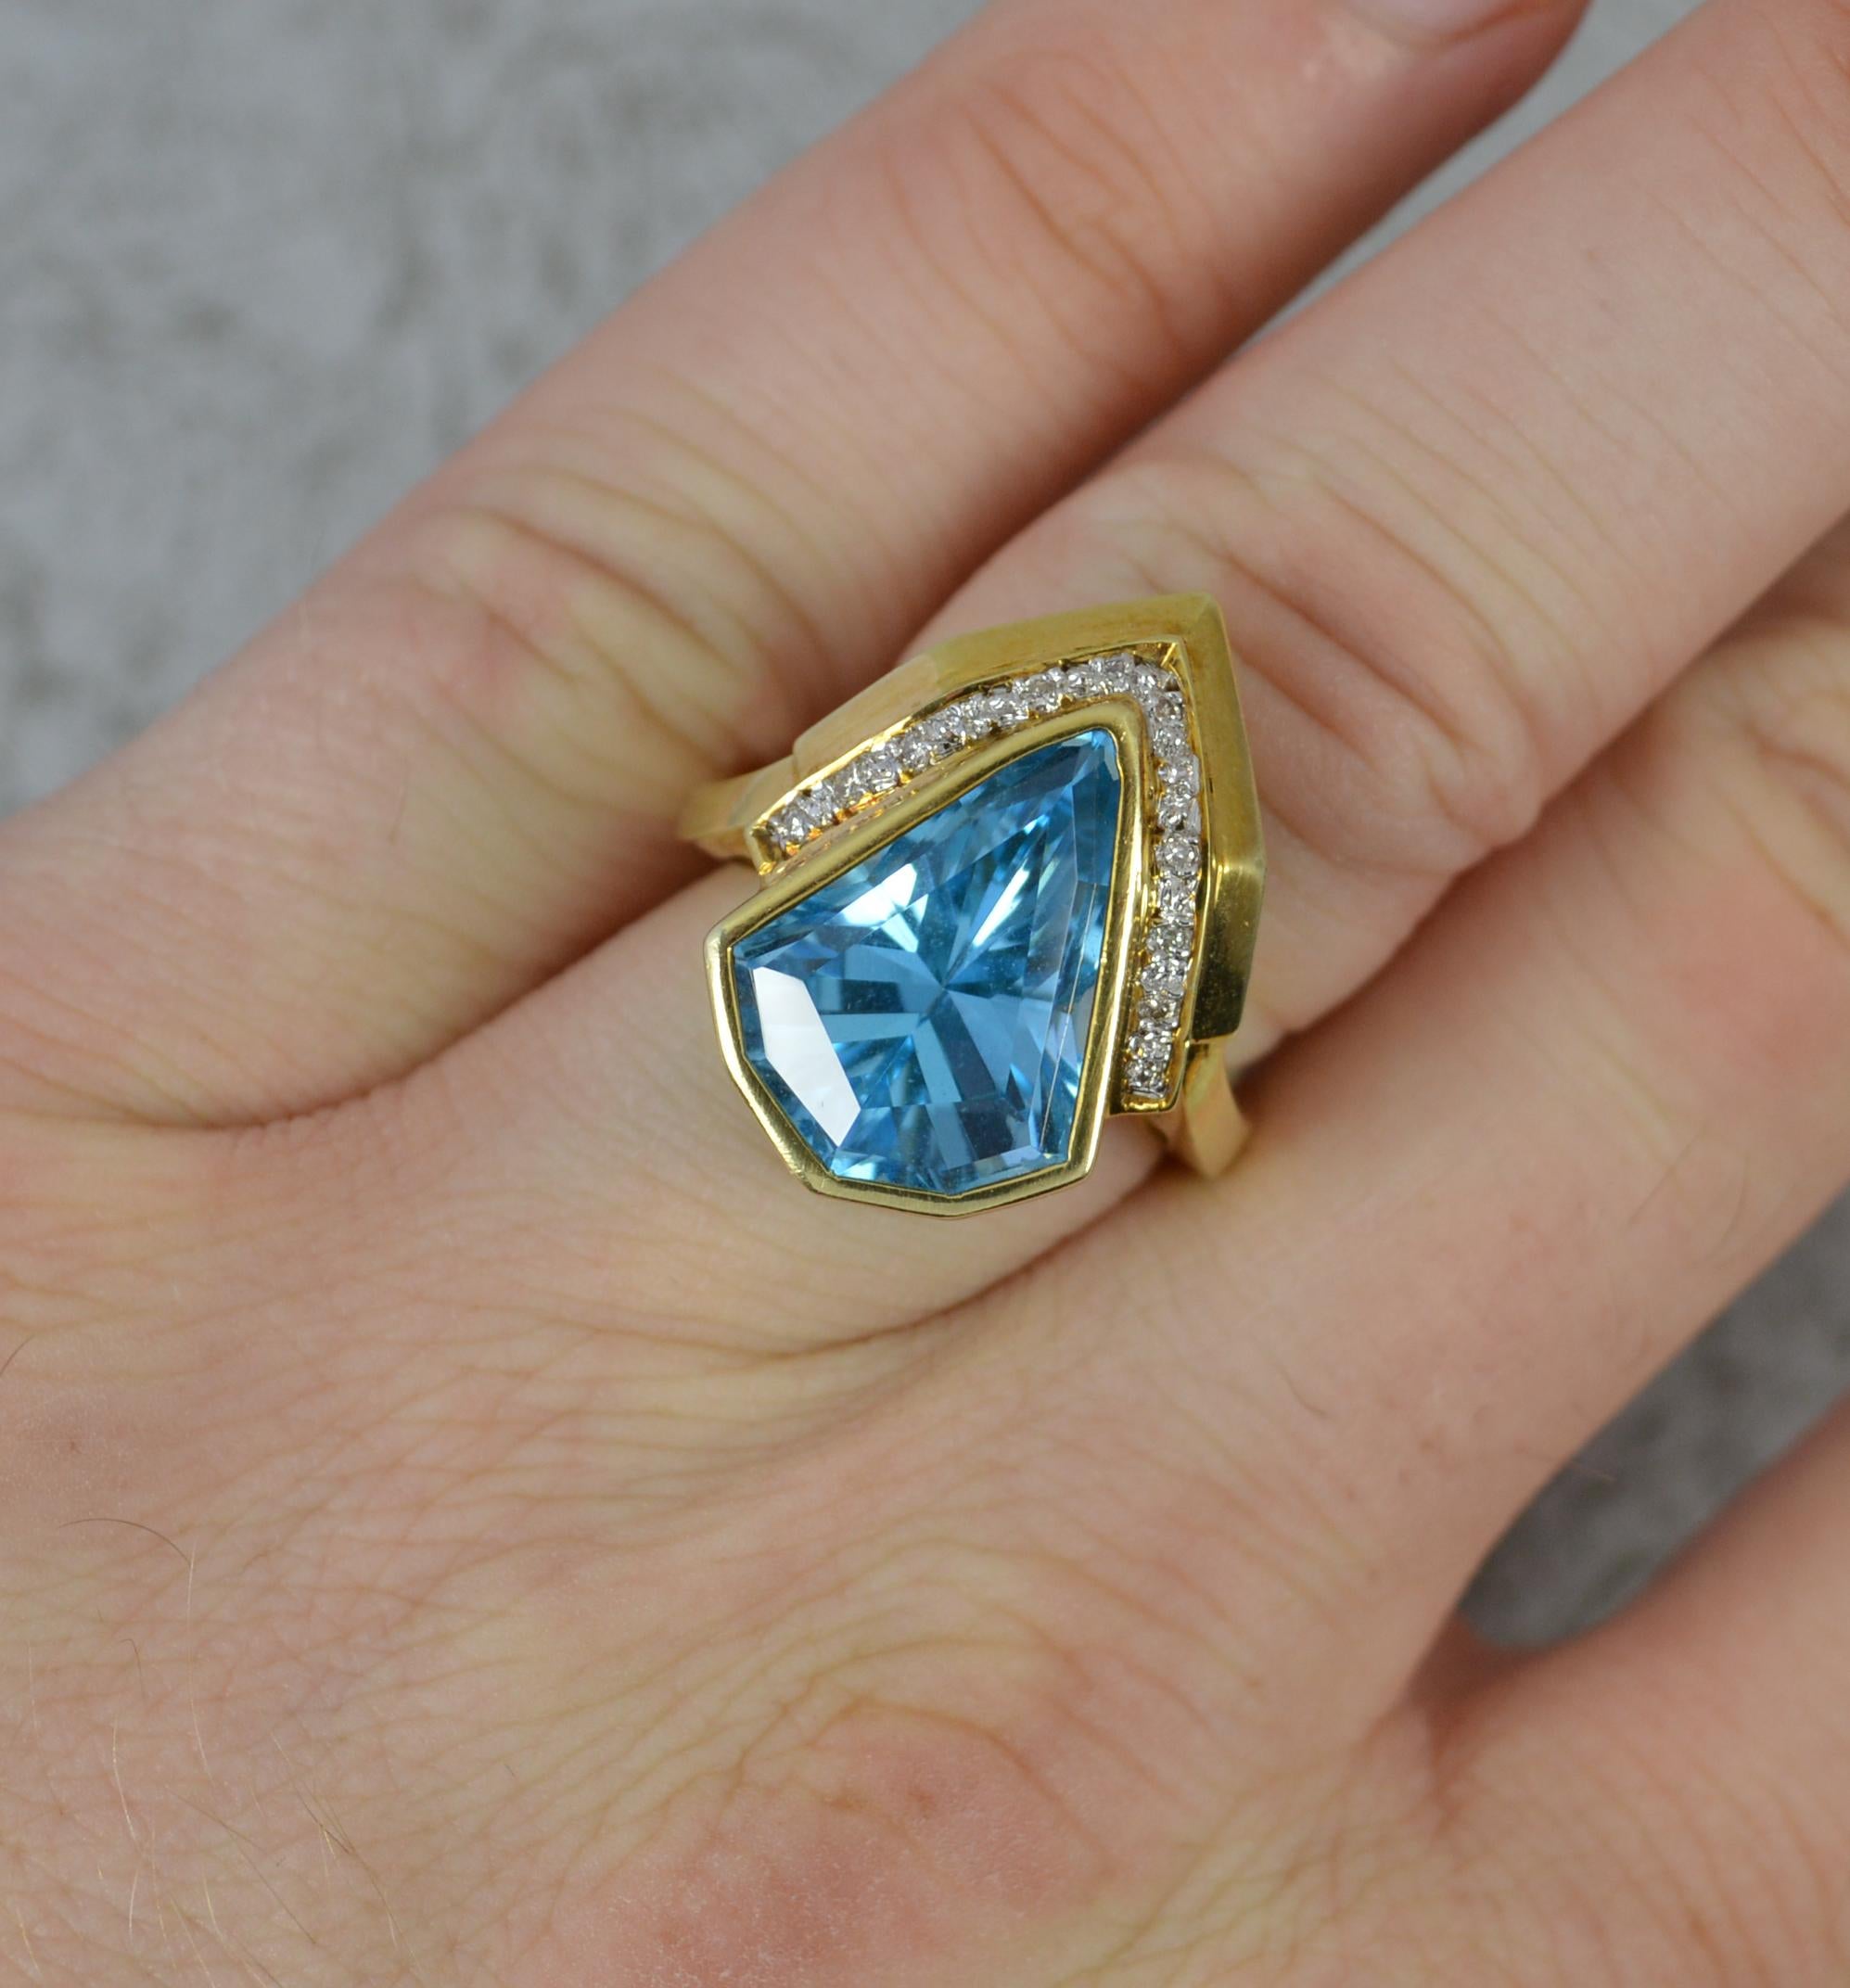 A beautiful Topaz and Diamond statement ring.
Solid 14 carat yellow gold example.
Designed with an unsually cut vivid blue topaz with many round cut diamonds set above.
12mm x 16mm stone. 
17mm x 23mm geometric head. Protruding 9mm off the finger.